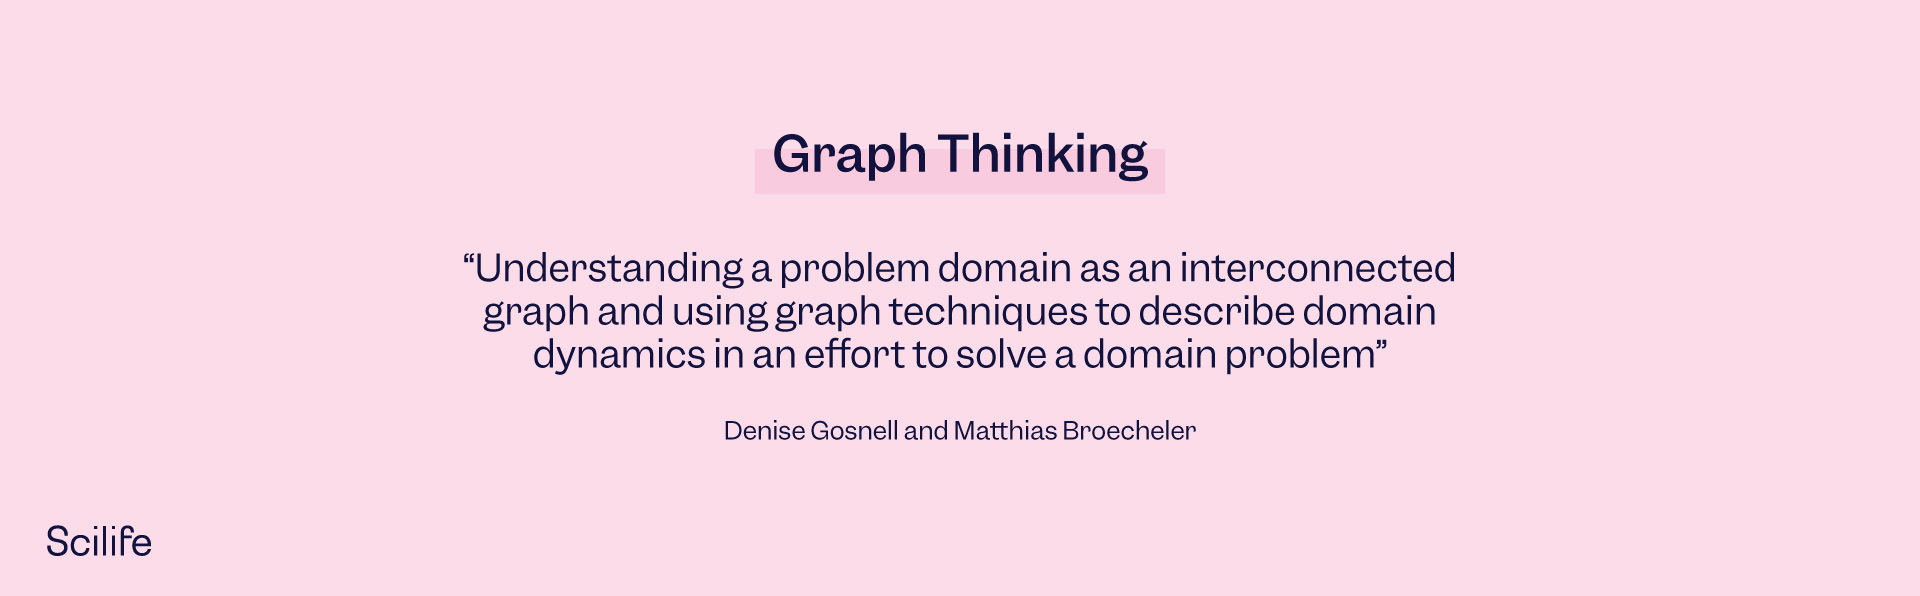 Quote about Graph Thinking | Scilife 